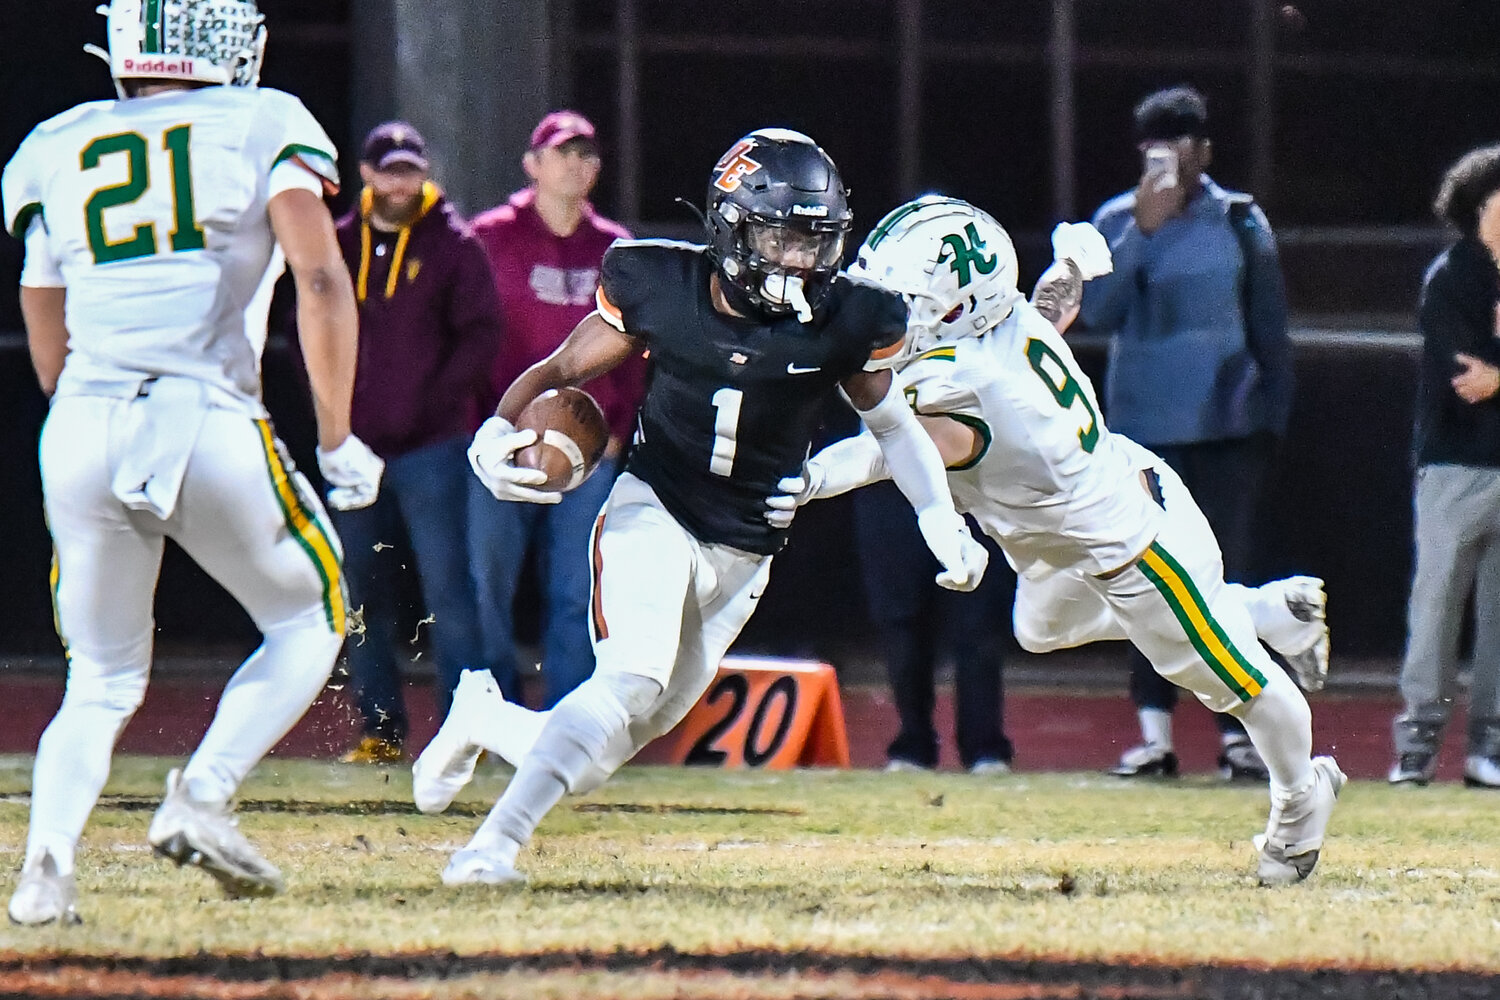 Desert Edge senir receiver Kezion Dia-Johnson cuts back trying to avoid the tackle of Horizon senior defensive end Jared Klopfenstein durin a 5A conference semifinal Nov. 24 in Goodyear.